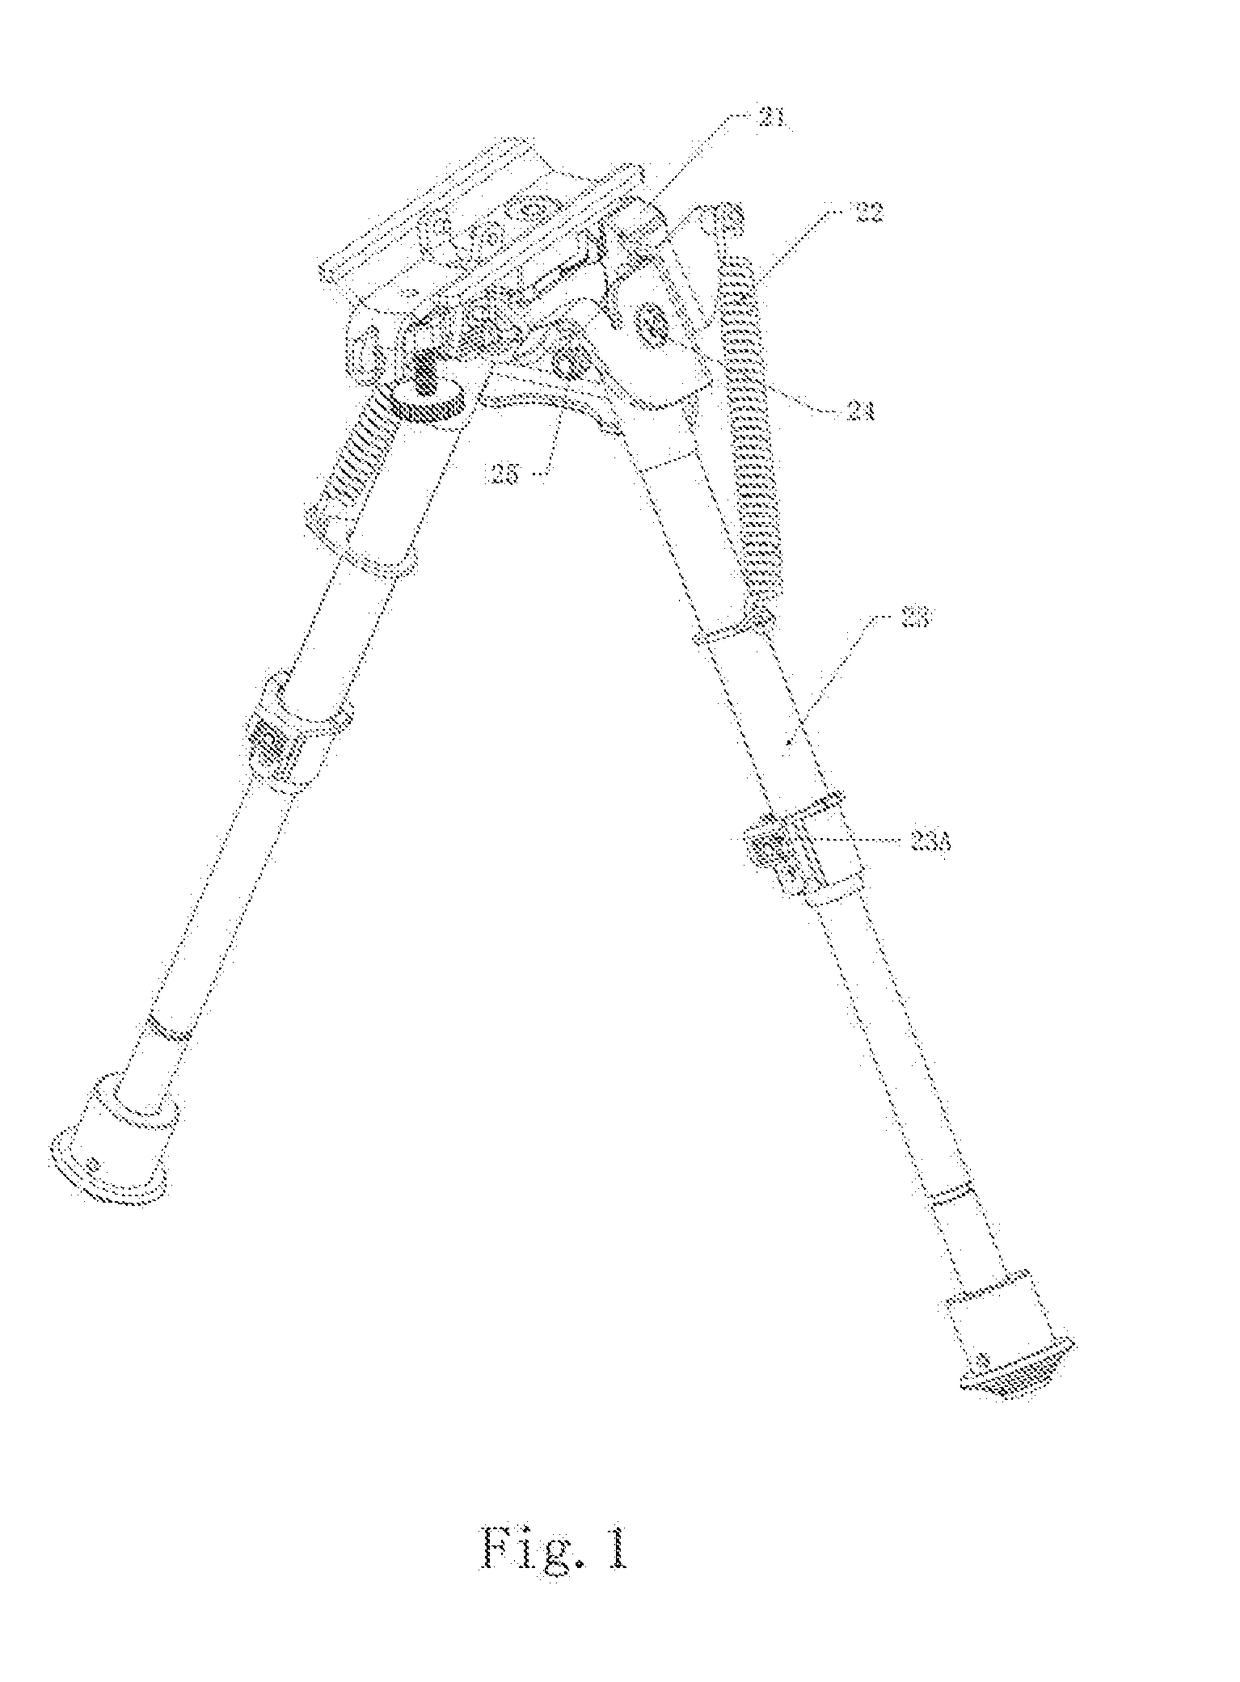 Bipod with compressively popping up inner leg assemblies